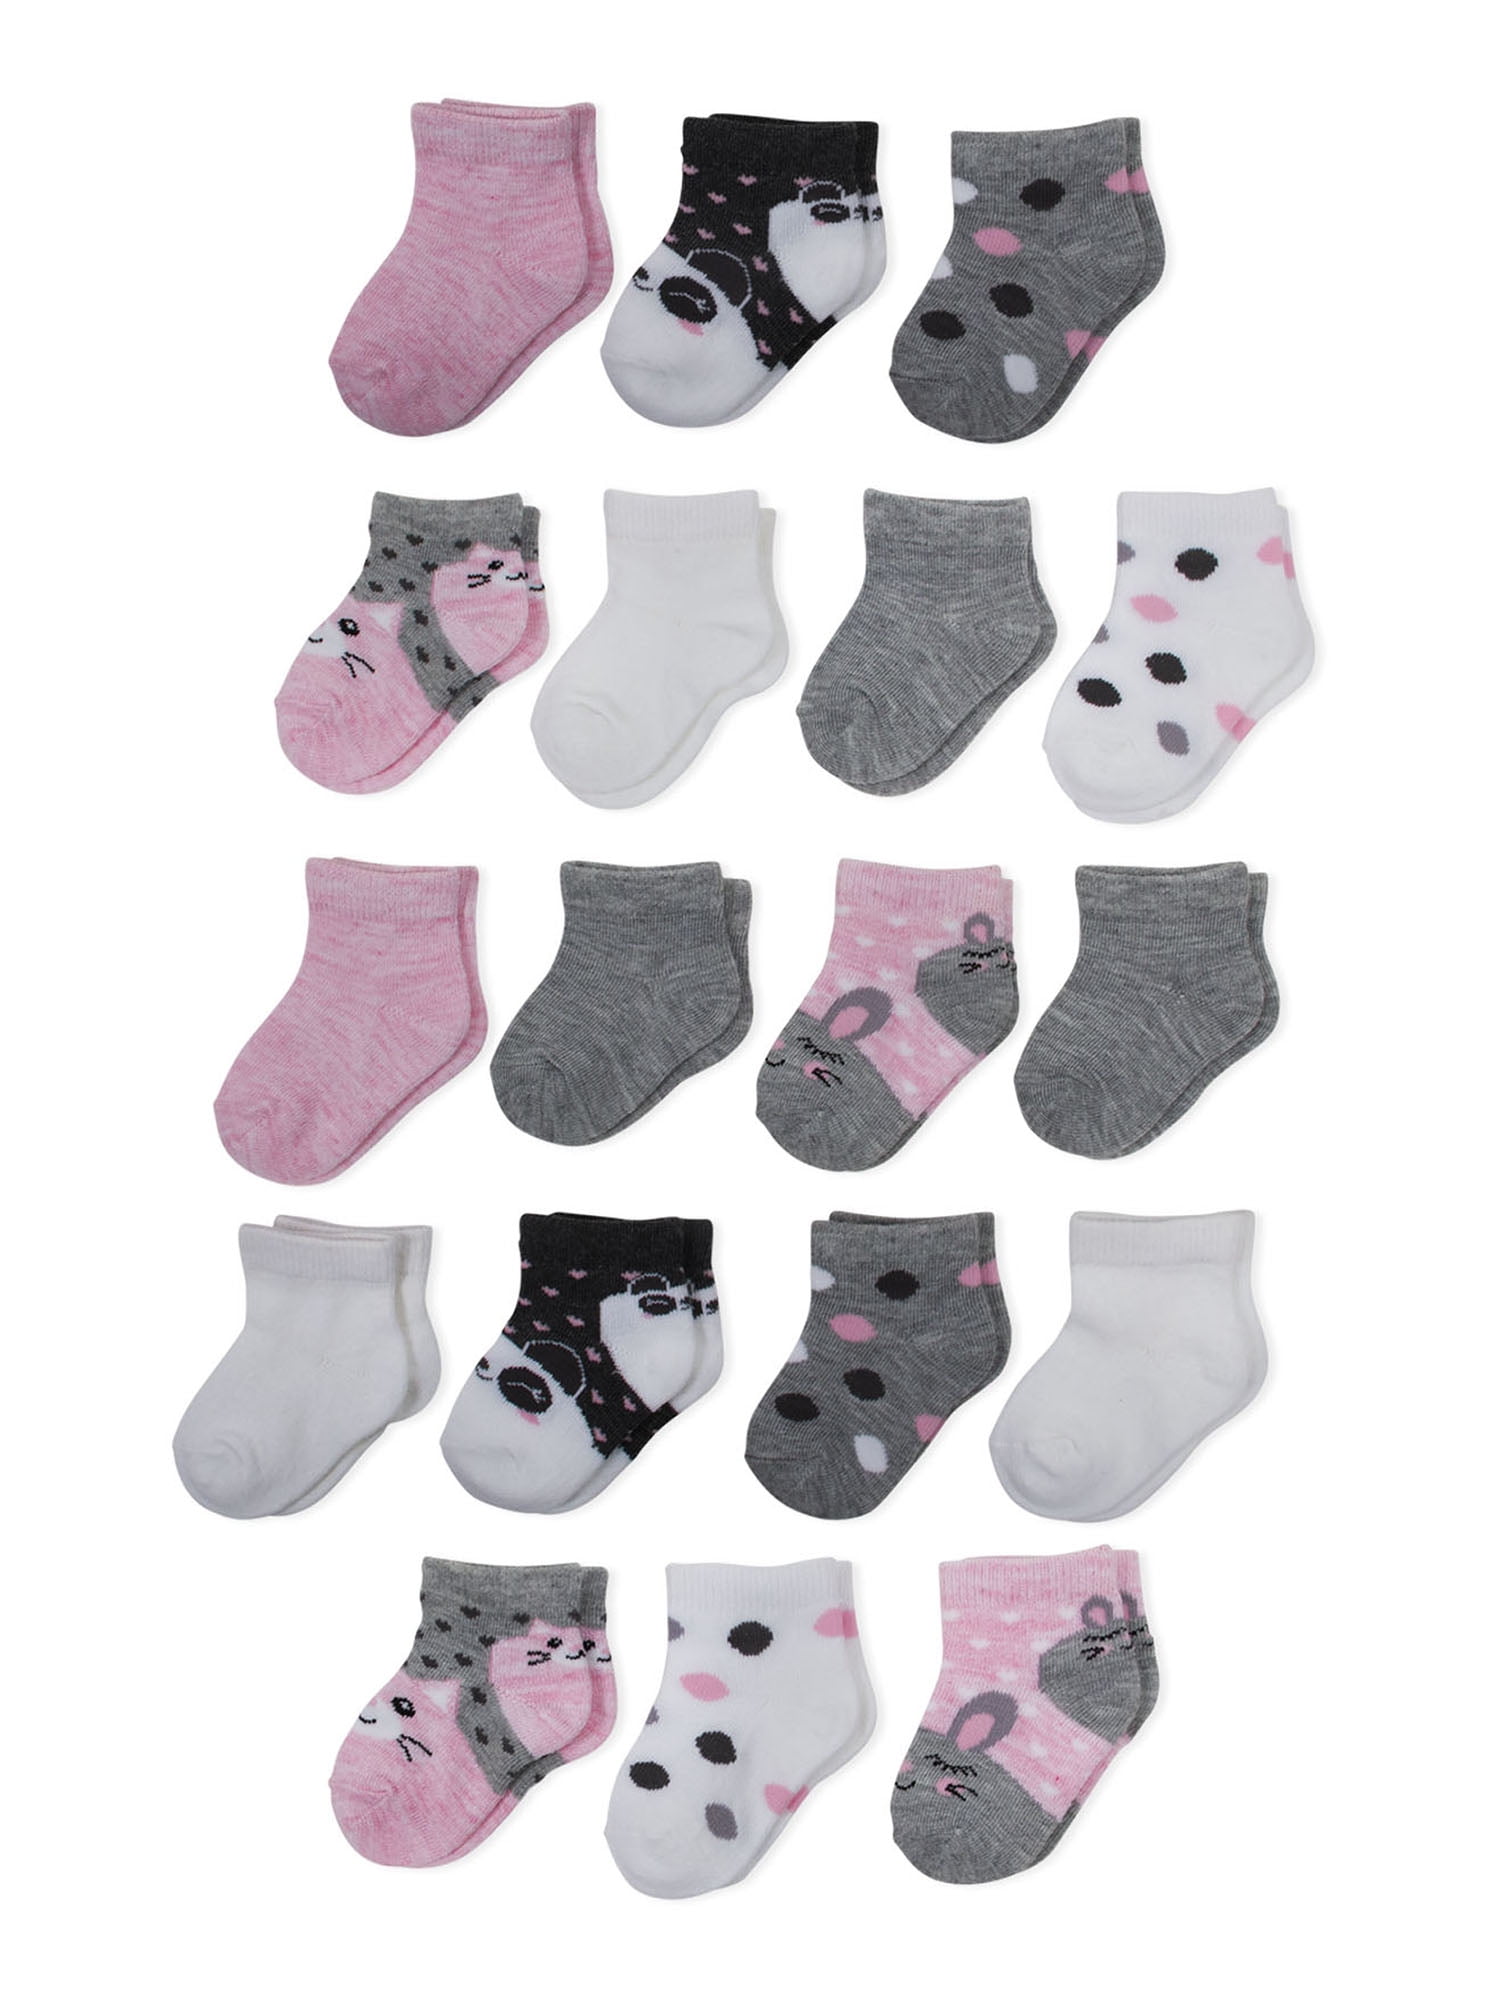 Baby Toddler Girls Cotton Ankle Trainer Summer Socks 3 Pairs Multi Buy 12-18Mnth 